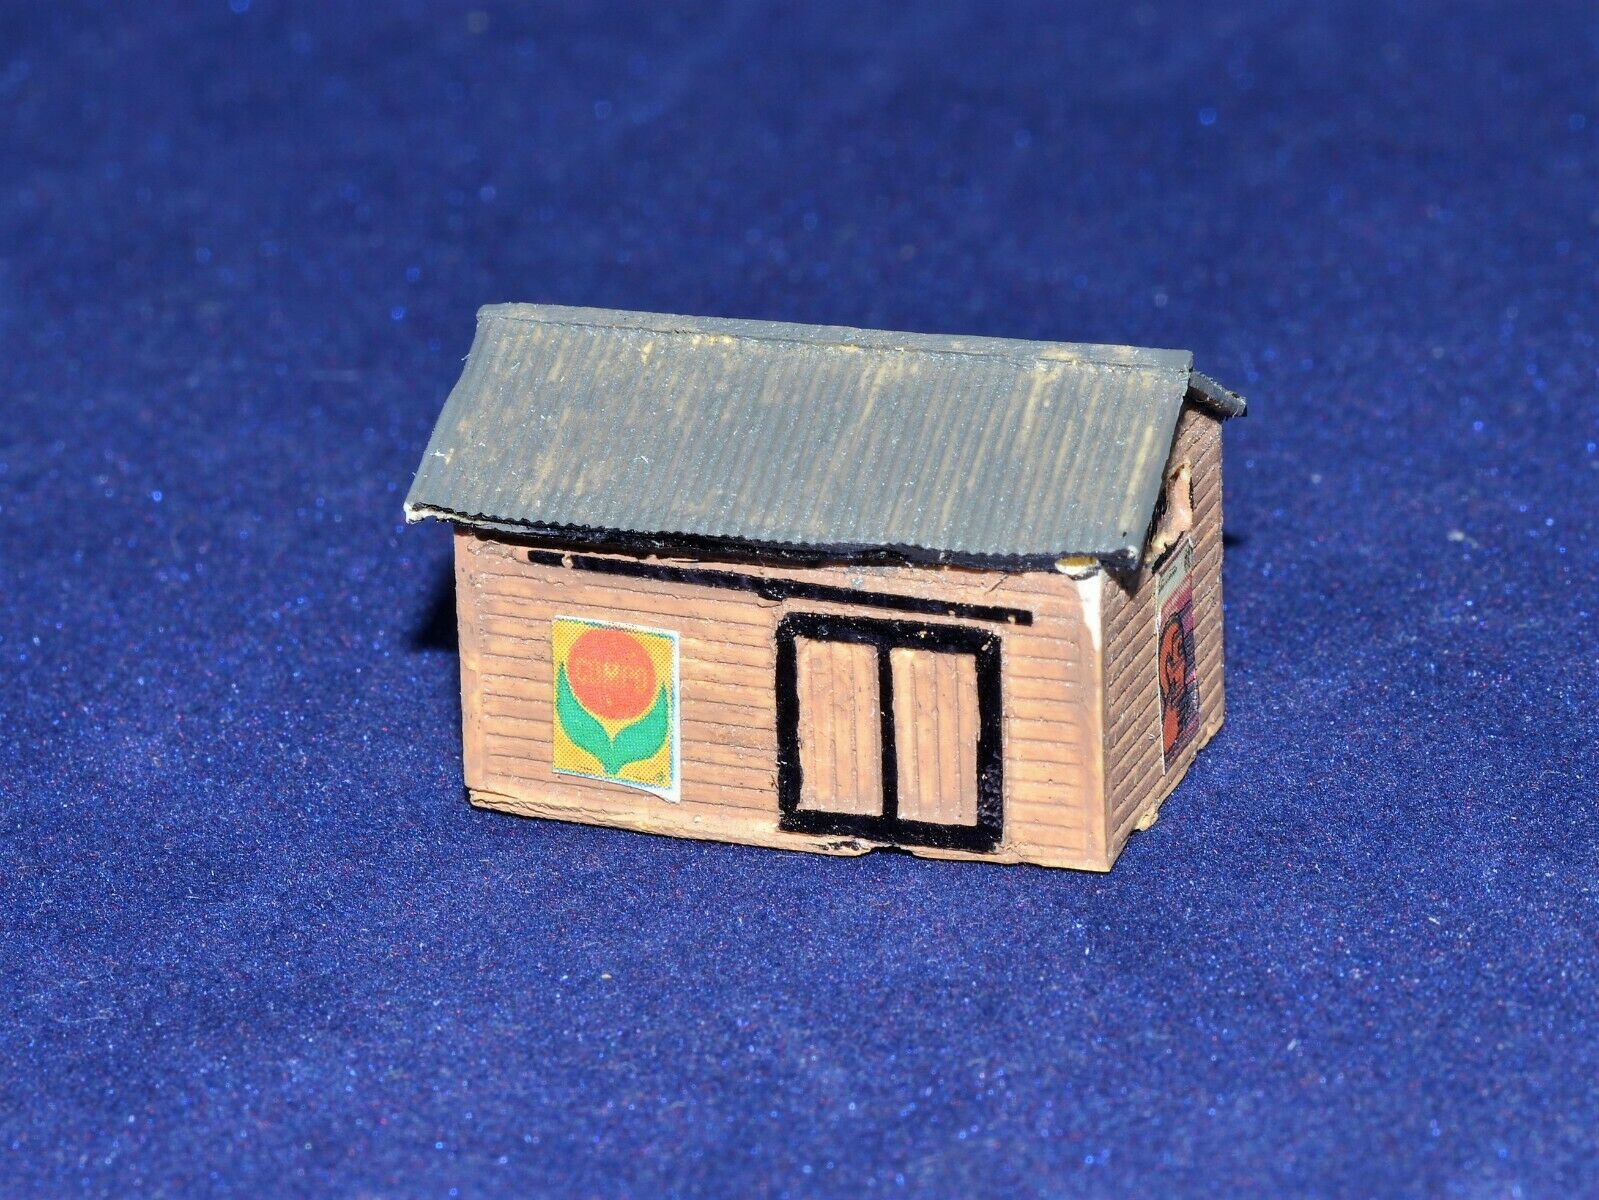 Z Scale Building Small Shack House - Approximately 1 1/4" Wide By 3/4" Tall